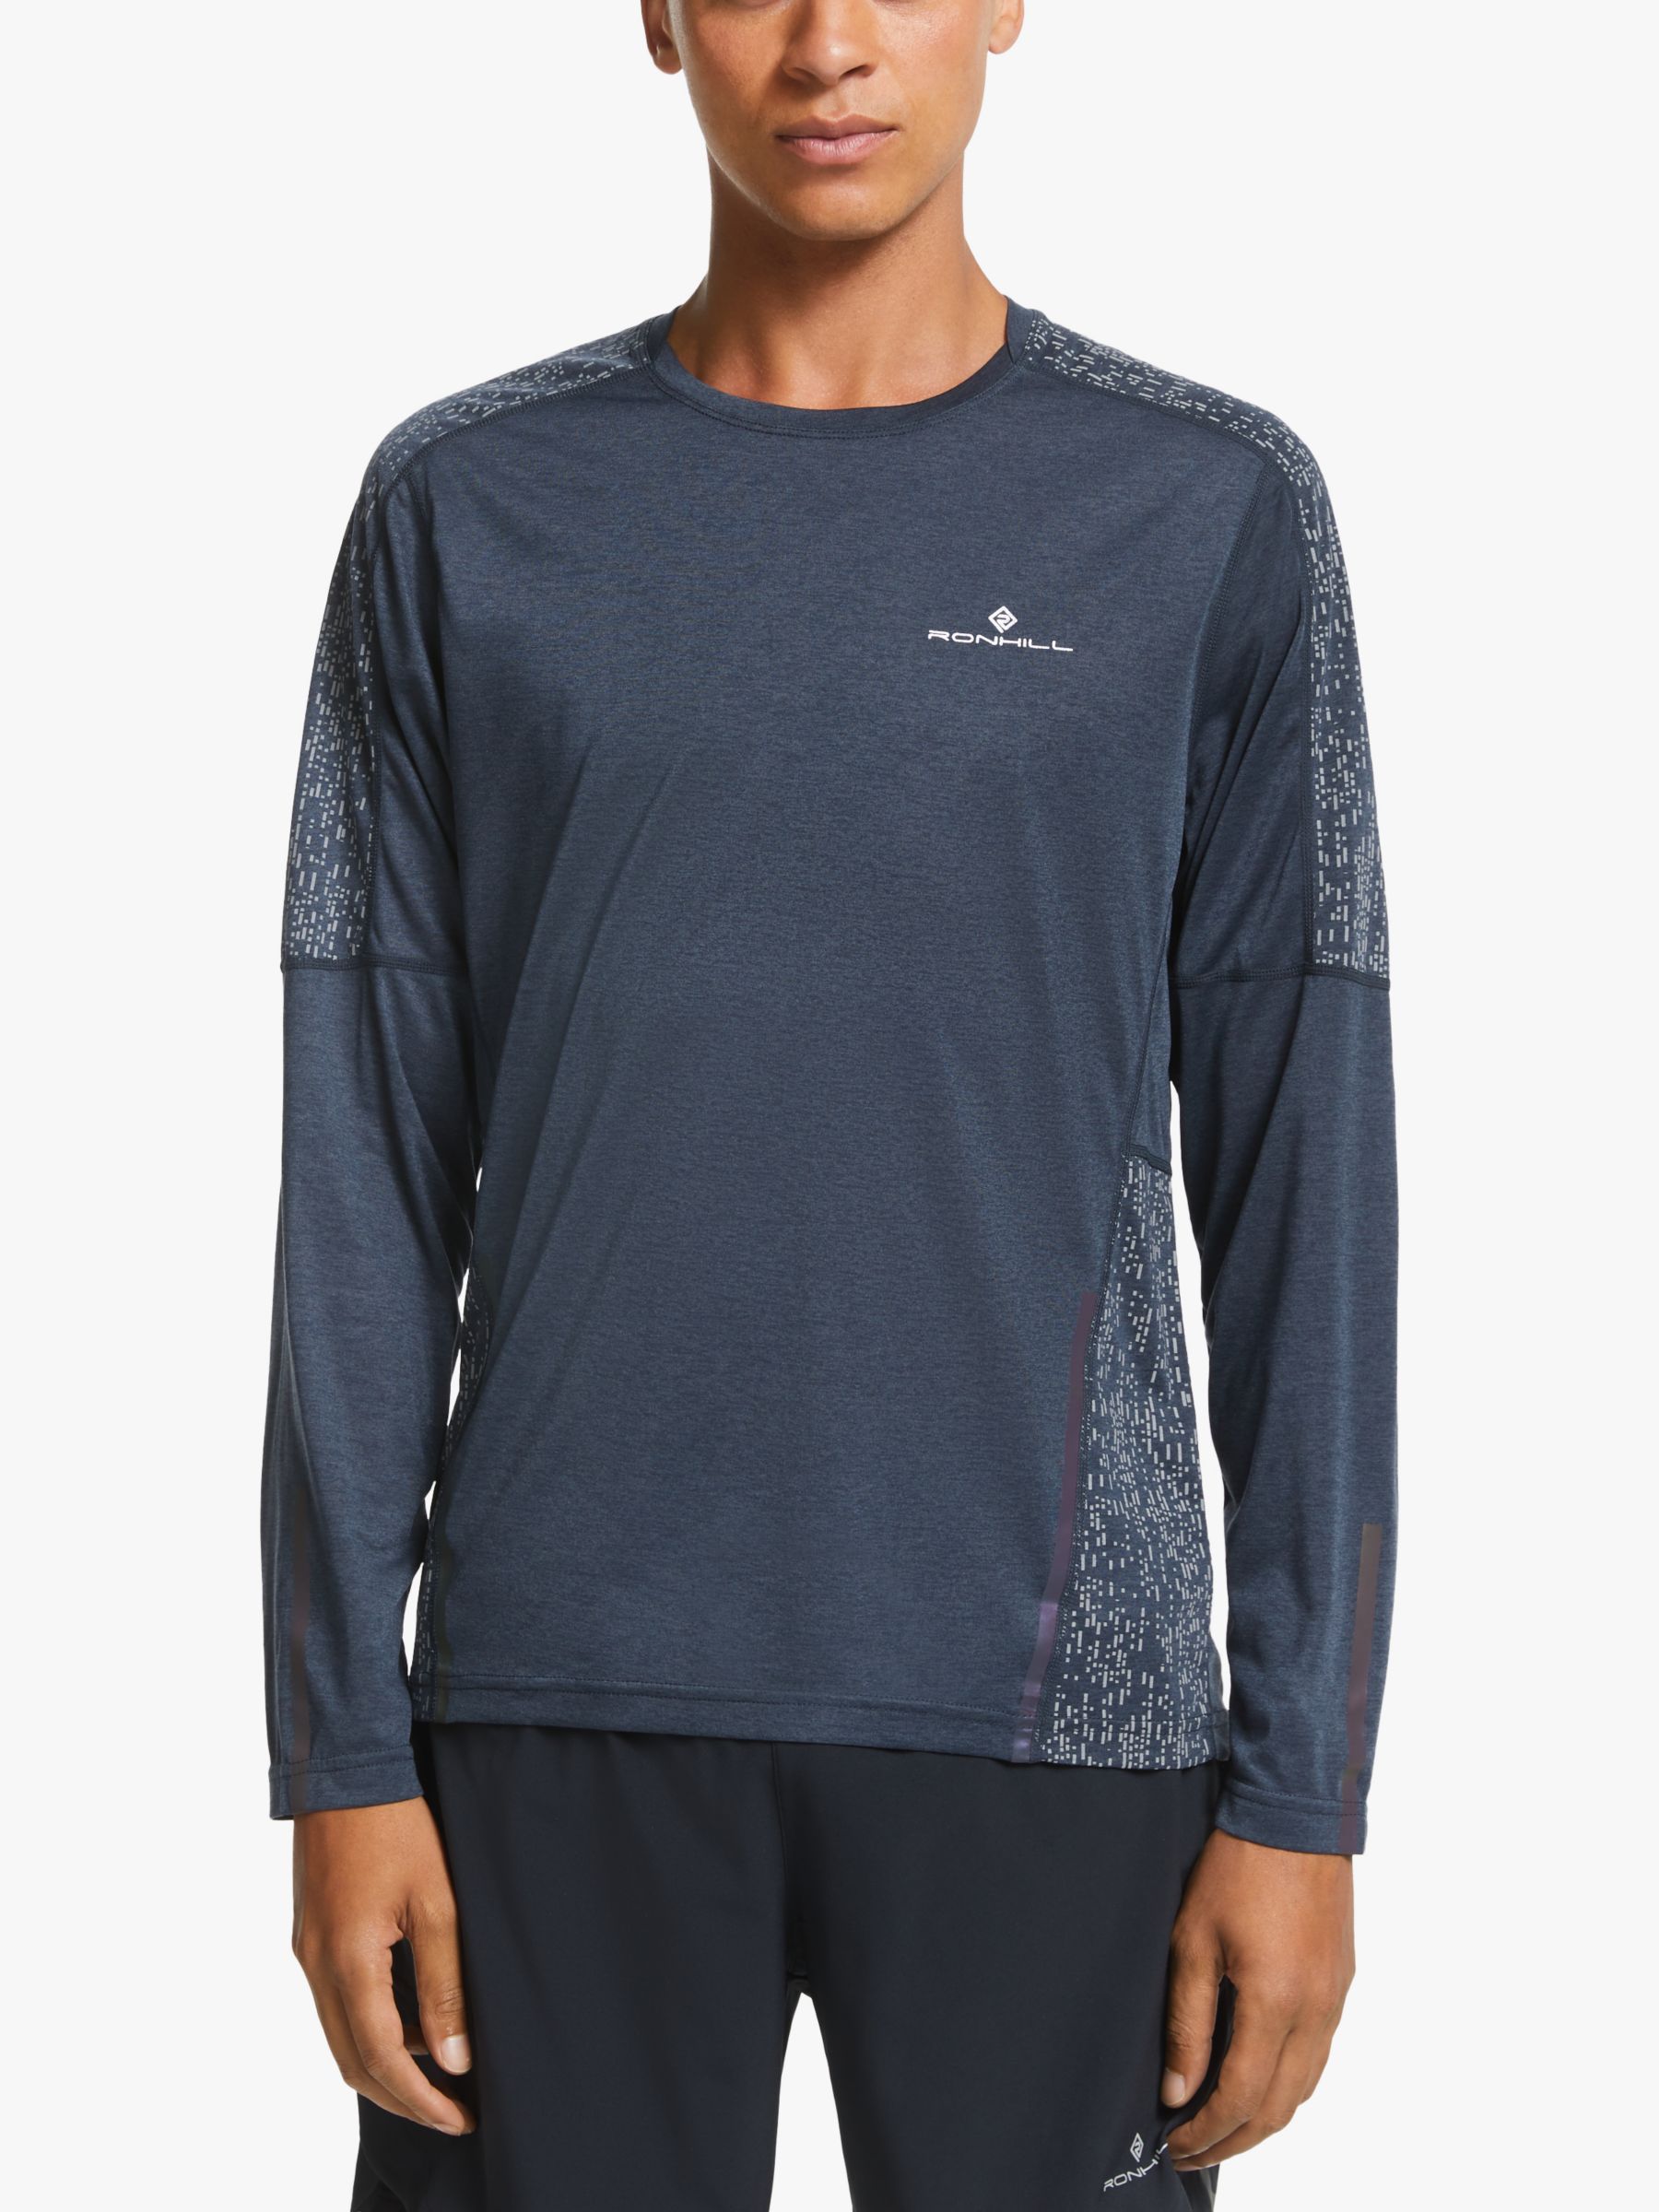 Ronhill Life Nightrunner Long Sleeve Running Top, Charcoal/Reflect at John Lewis & Partners